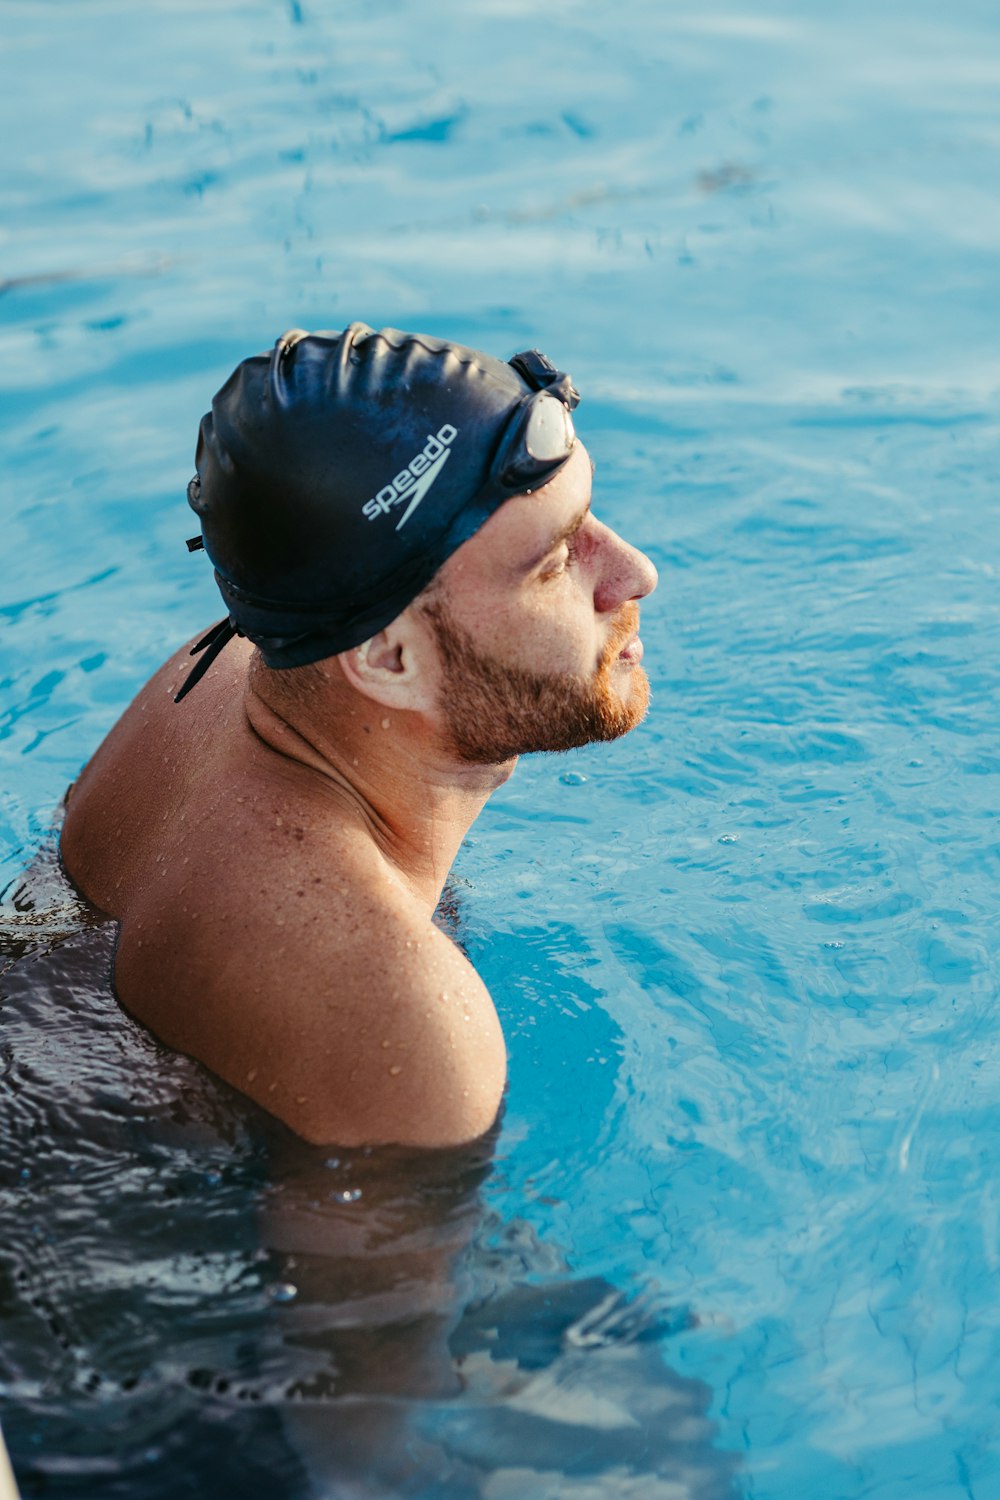 a man swimming in a pool wearing a swimming cap